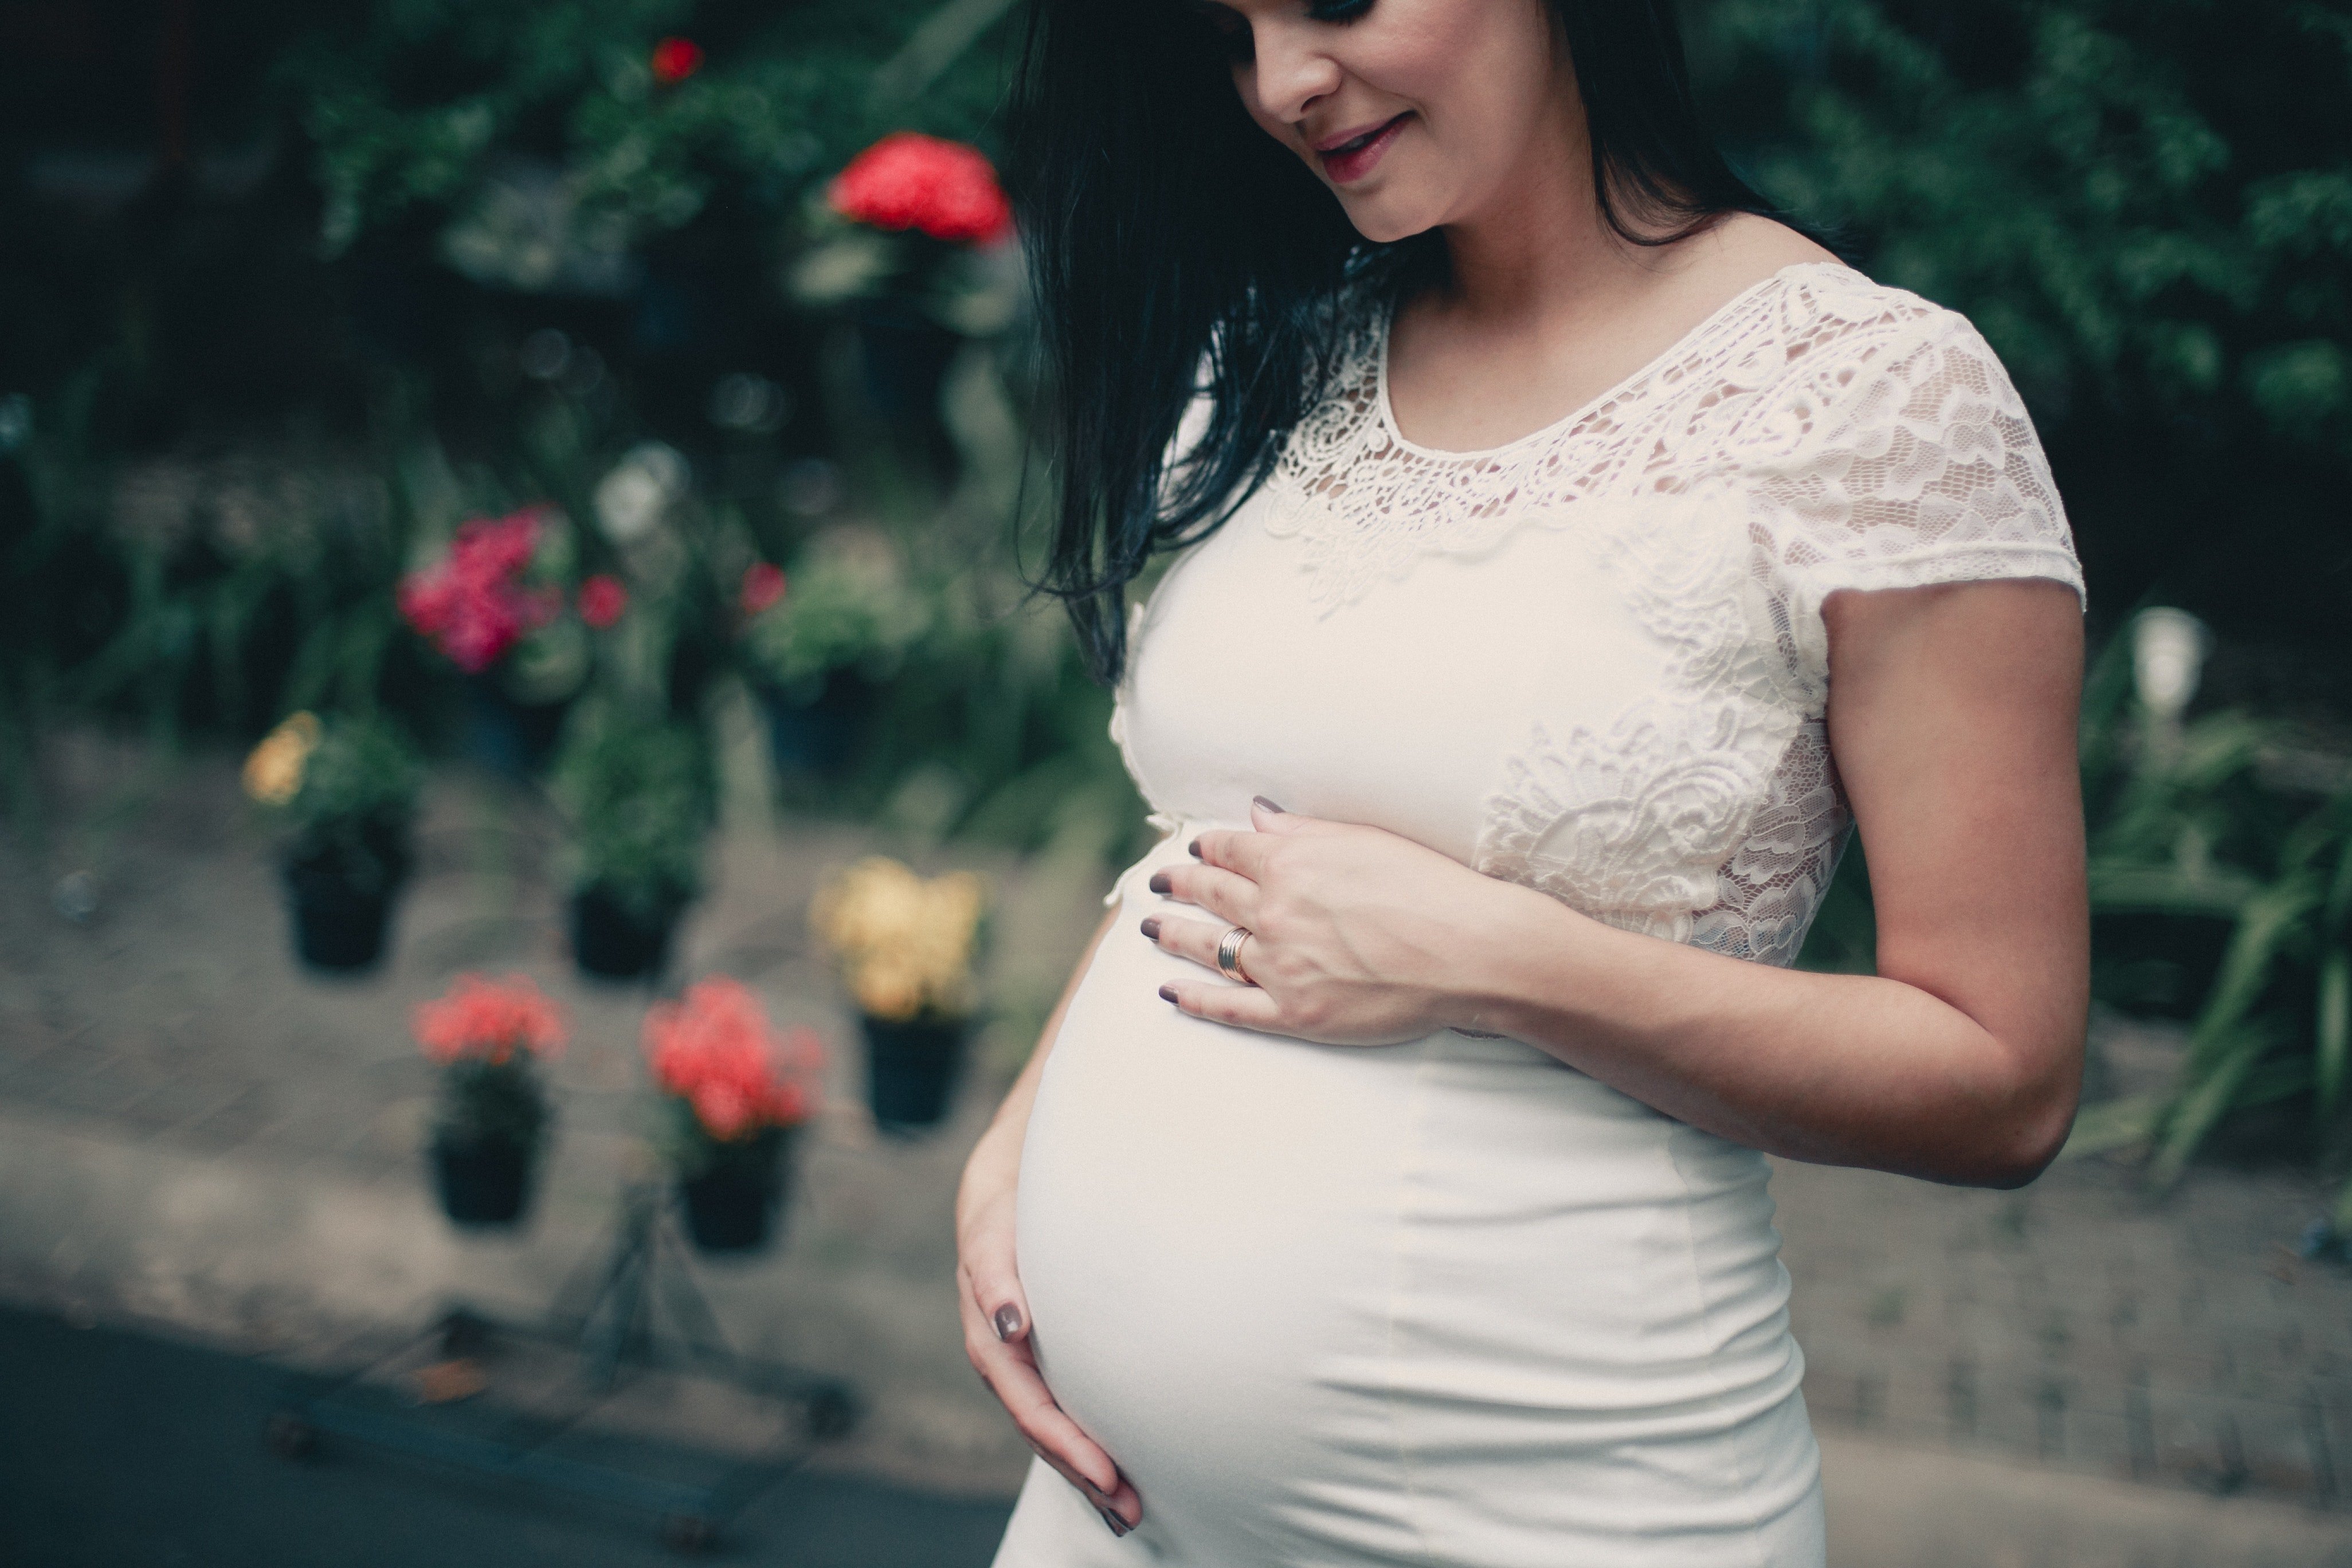 Kishova was pregnant and expecting to birth twins | Source: Pexels